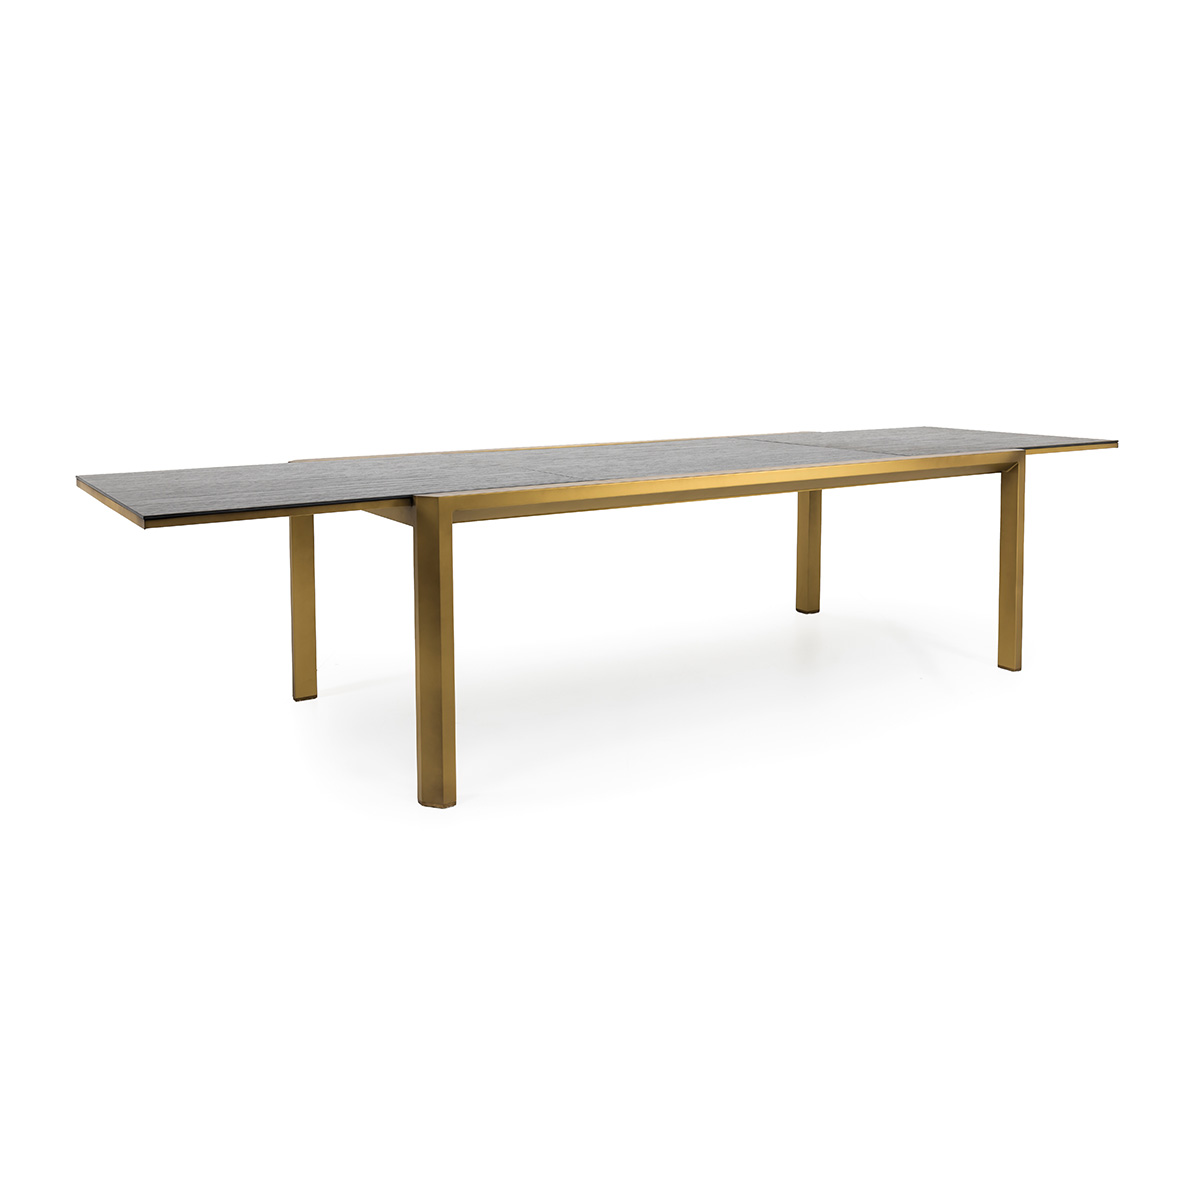 Extendible dining table Tables Braid